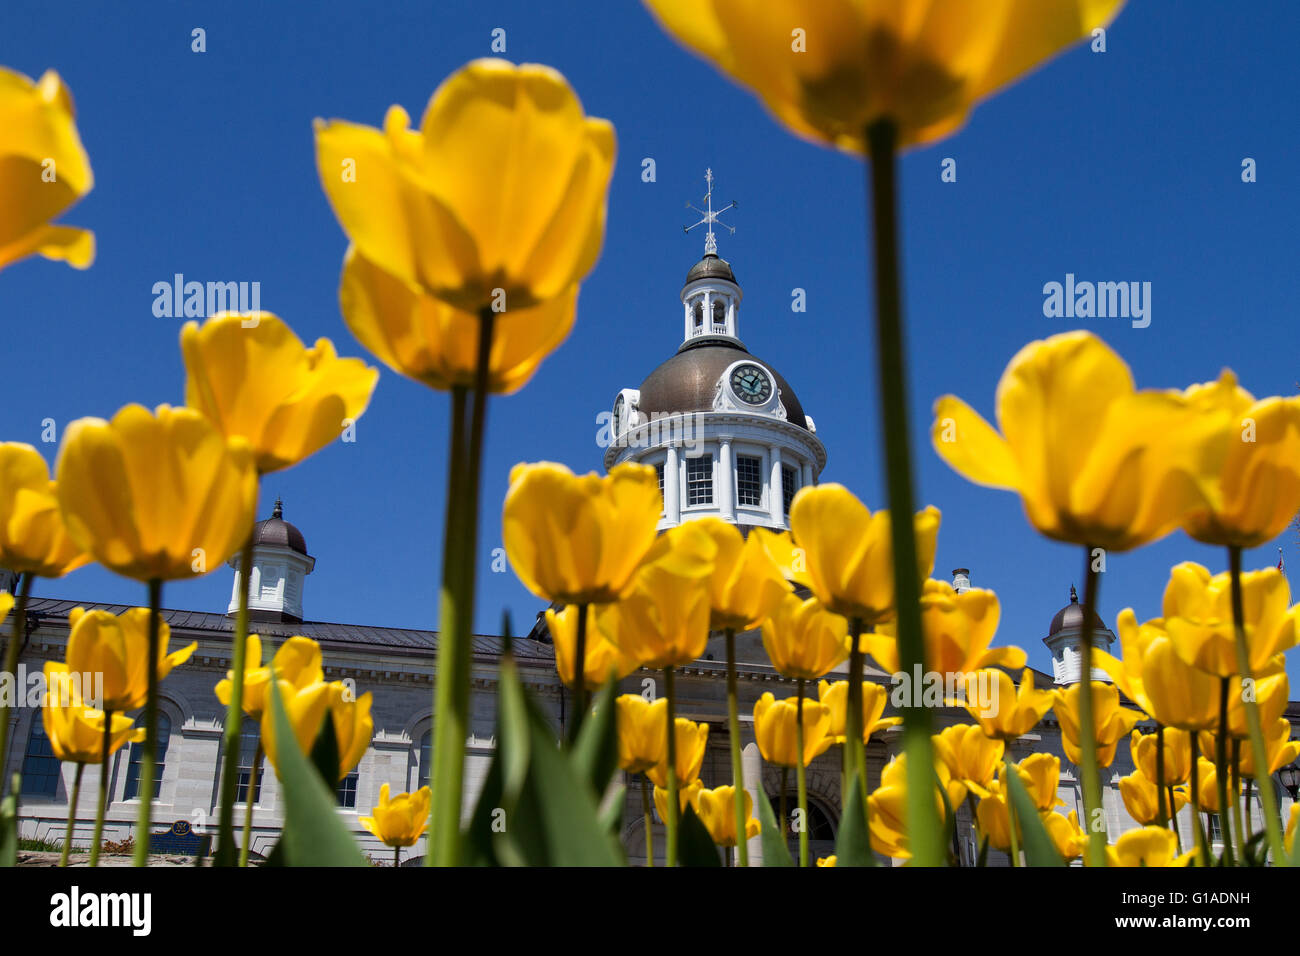 City hall in Kingston Ont., on May 11, 2016. Stock Photo